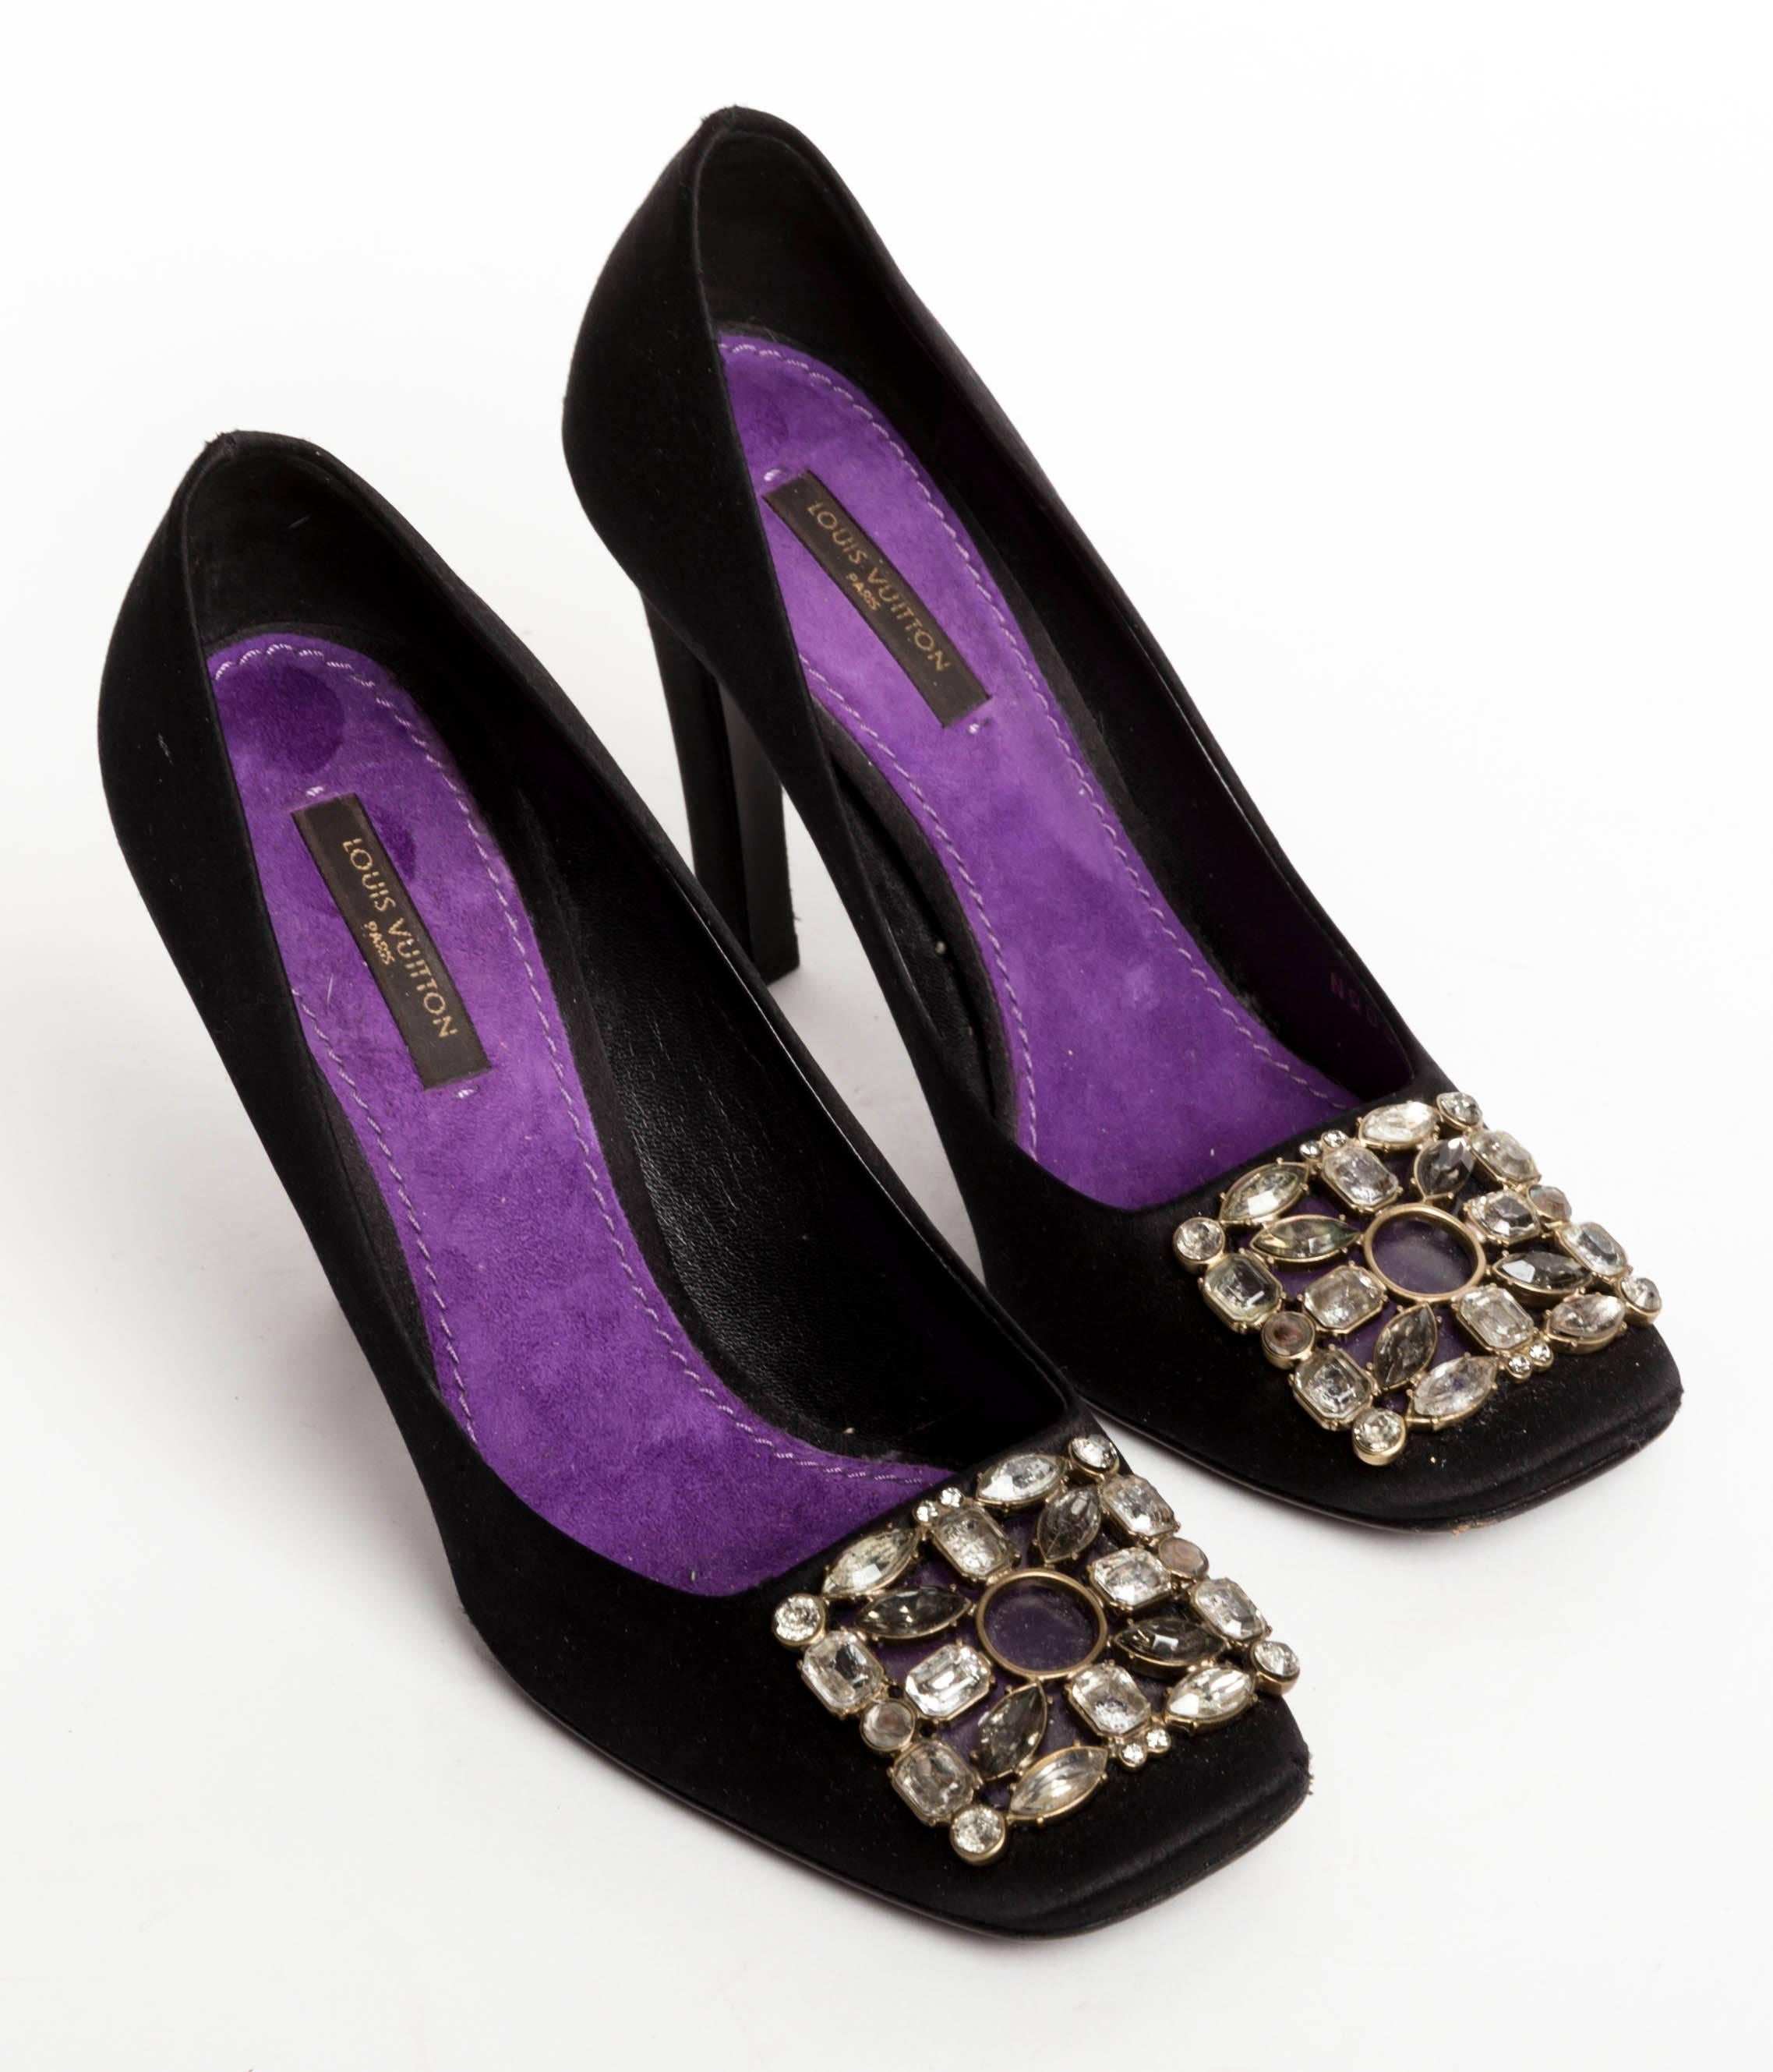 Louis Vuitton Black Silk Pumps with Jeweled Buckles - 37 1/2 3